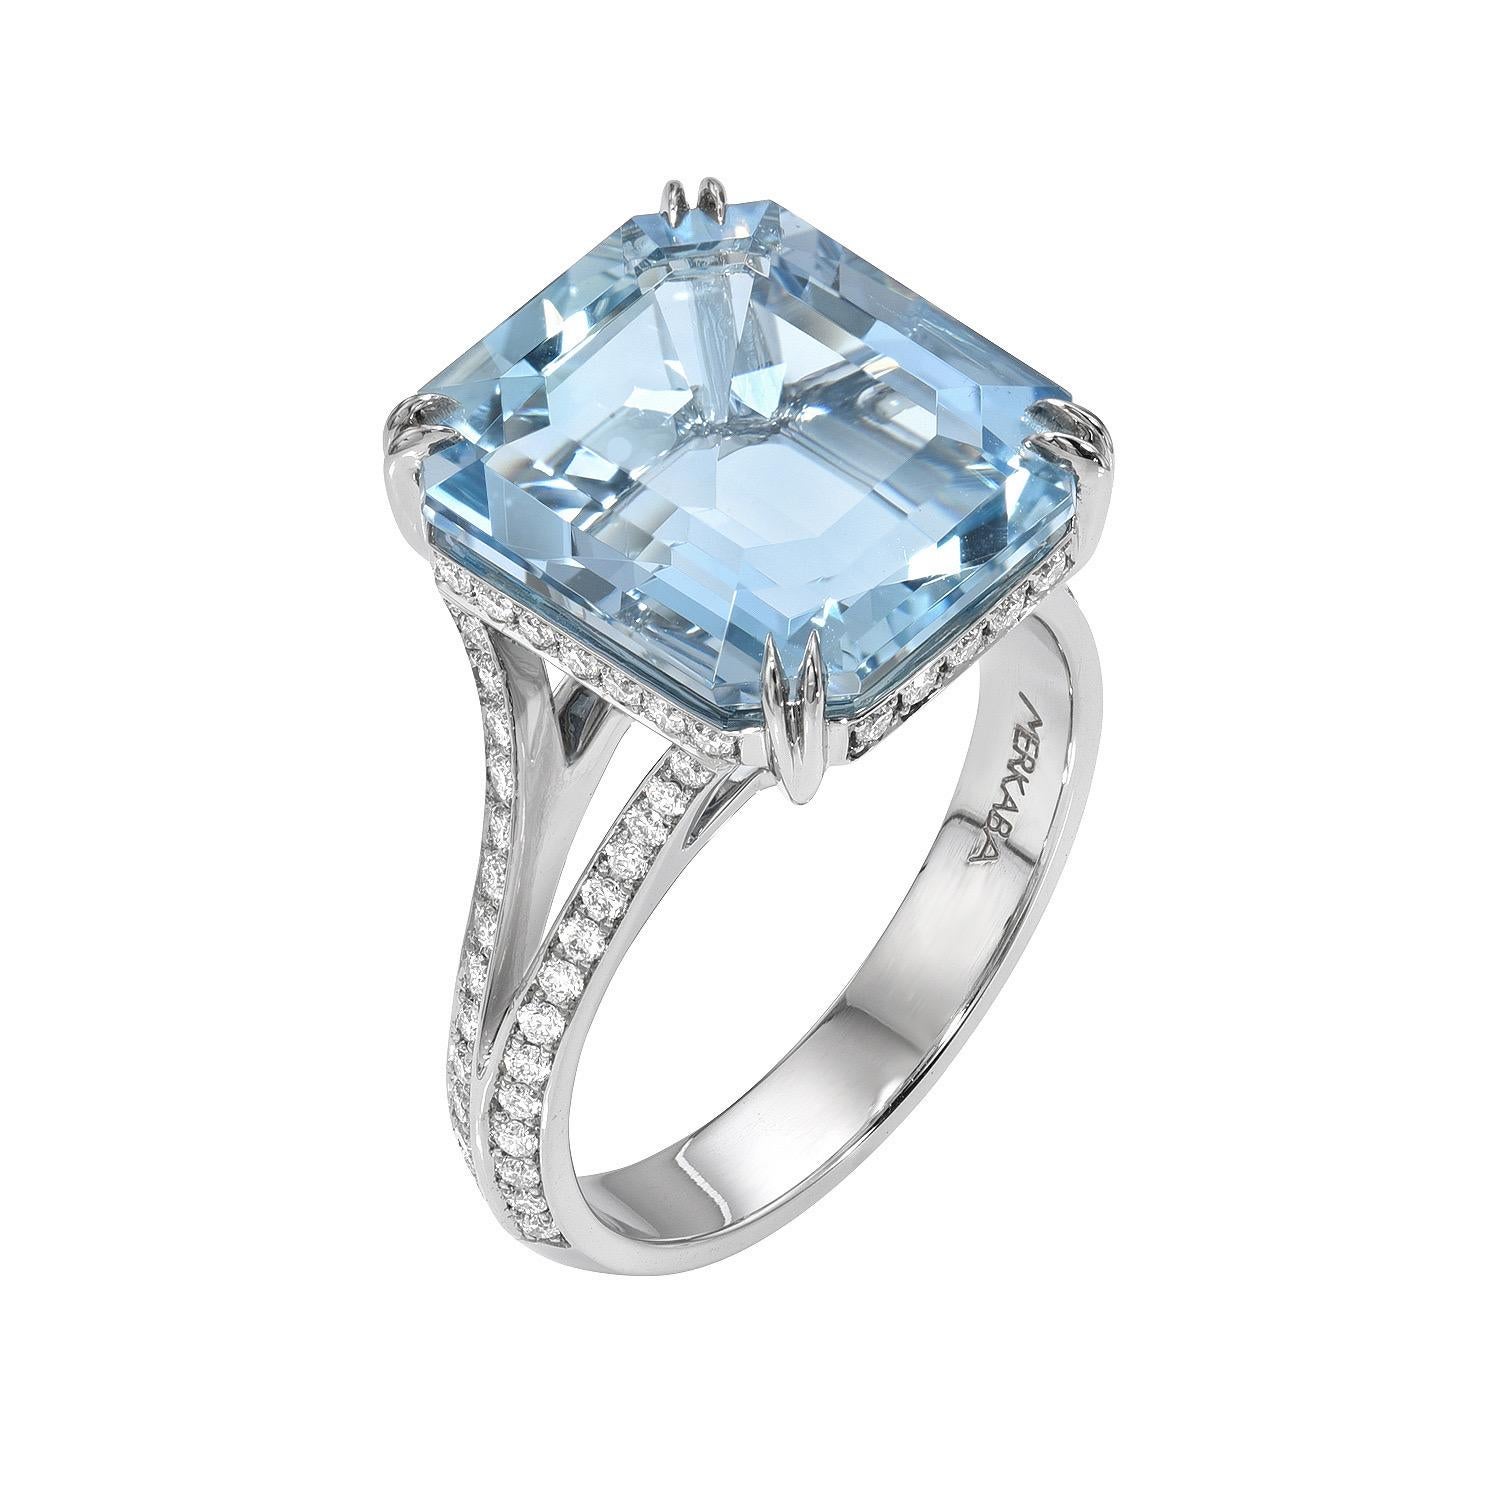 Impressive 7.68 carat Aquamarine Emerald-Cut platinum ring, decorated with a total of 0.49 carat round brilliant collection diamonds.
Ring size 6.5. Resizing is complementary upon request.
Crafted by extremely skilled hands in the USA.
Returns are